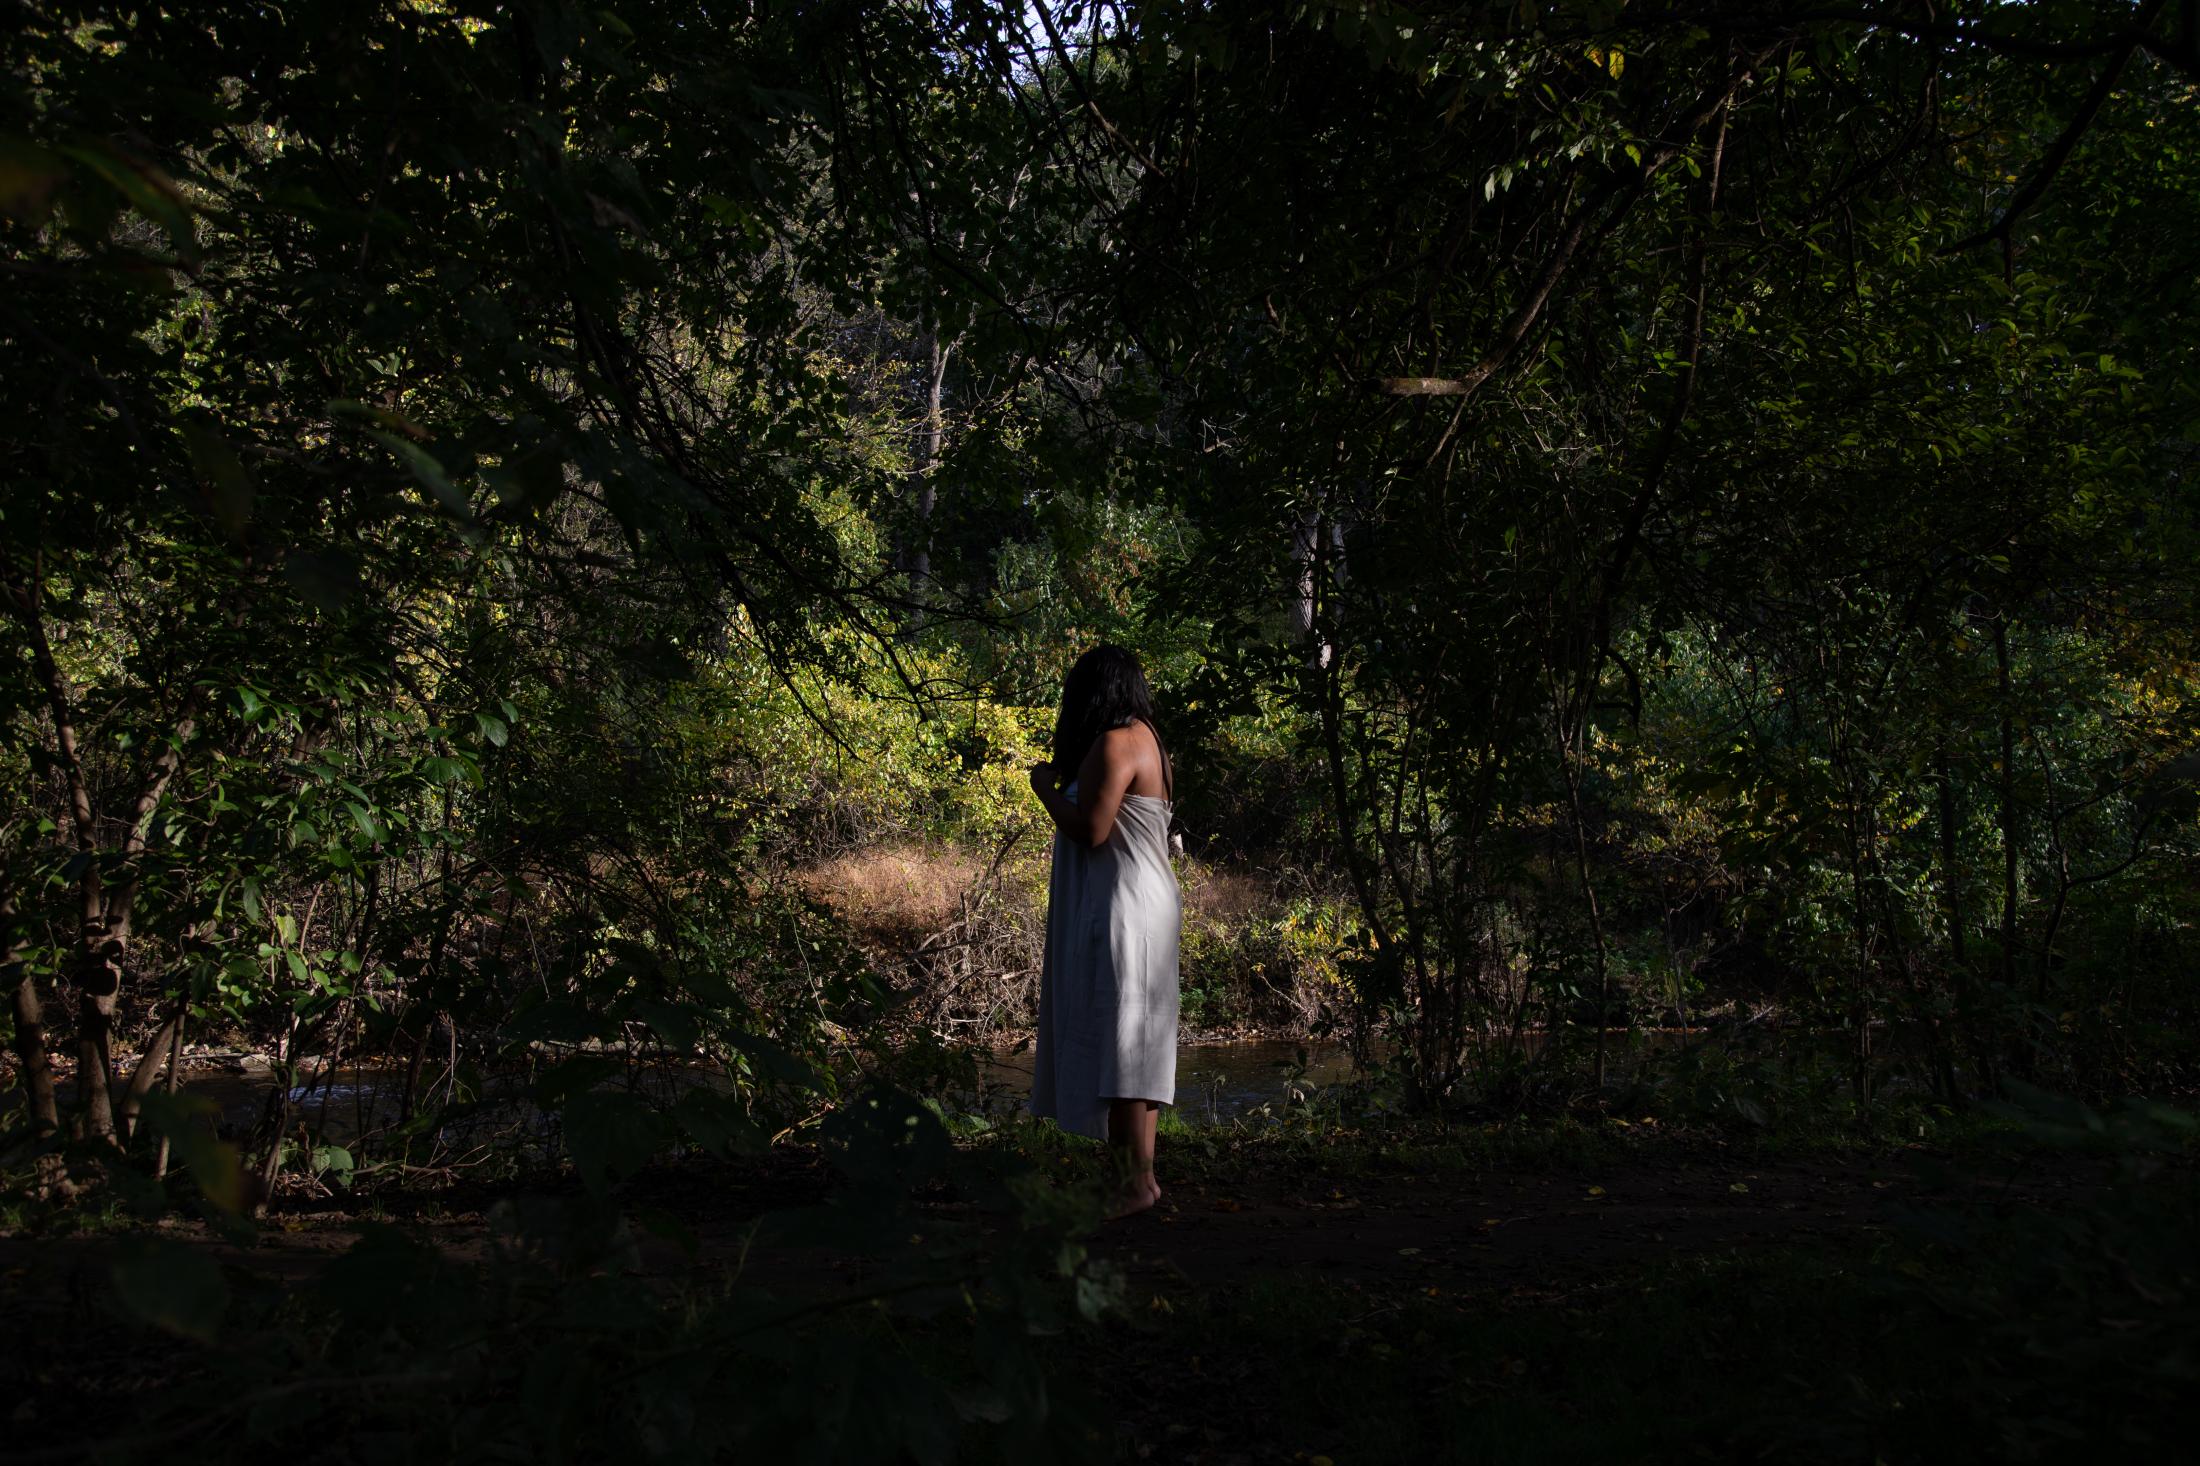 yana achik - I grew up by a river, I would sit on the hill that...